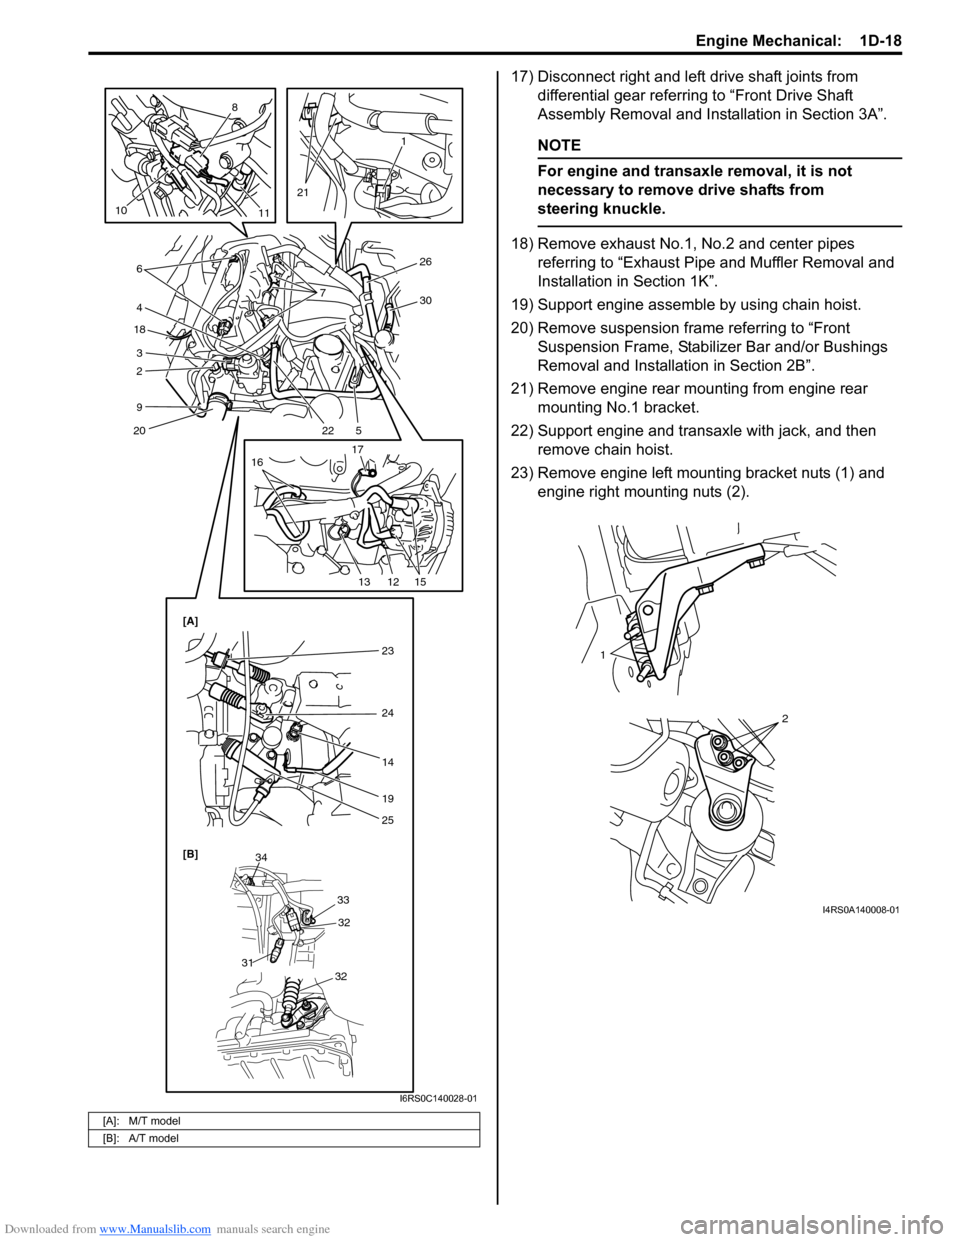 SUZUKI SWIFT 2006 2.G Service User Guide Downloaded from www.Manualslib.com manuals search engine Engine Mechanical:  1D-18
17) Disconnect right and left drive shaft joints from differential gear referring to “Front Drive Shaft 
Assembly R